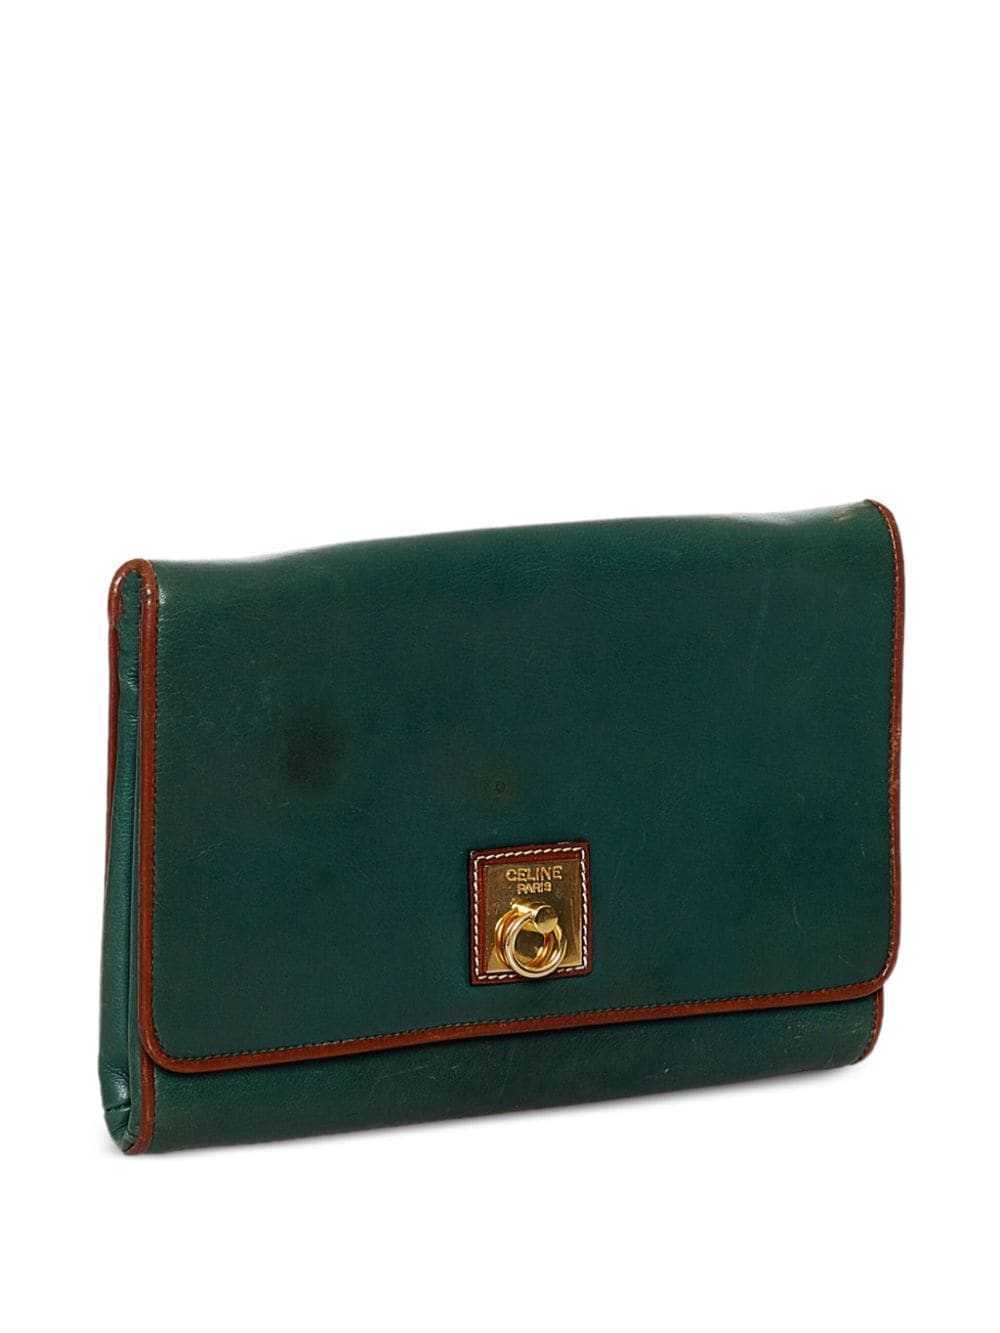 Céline Pre-Owned Leather clutch bag - Green - image 3